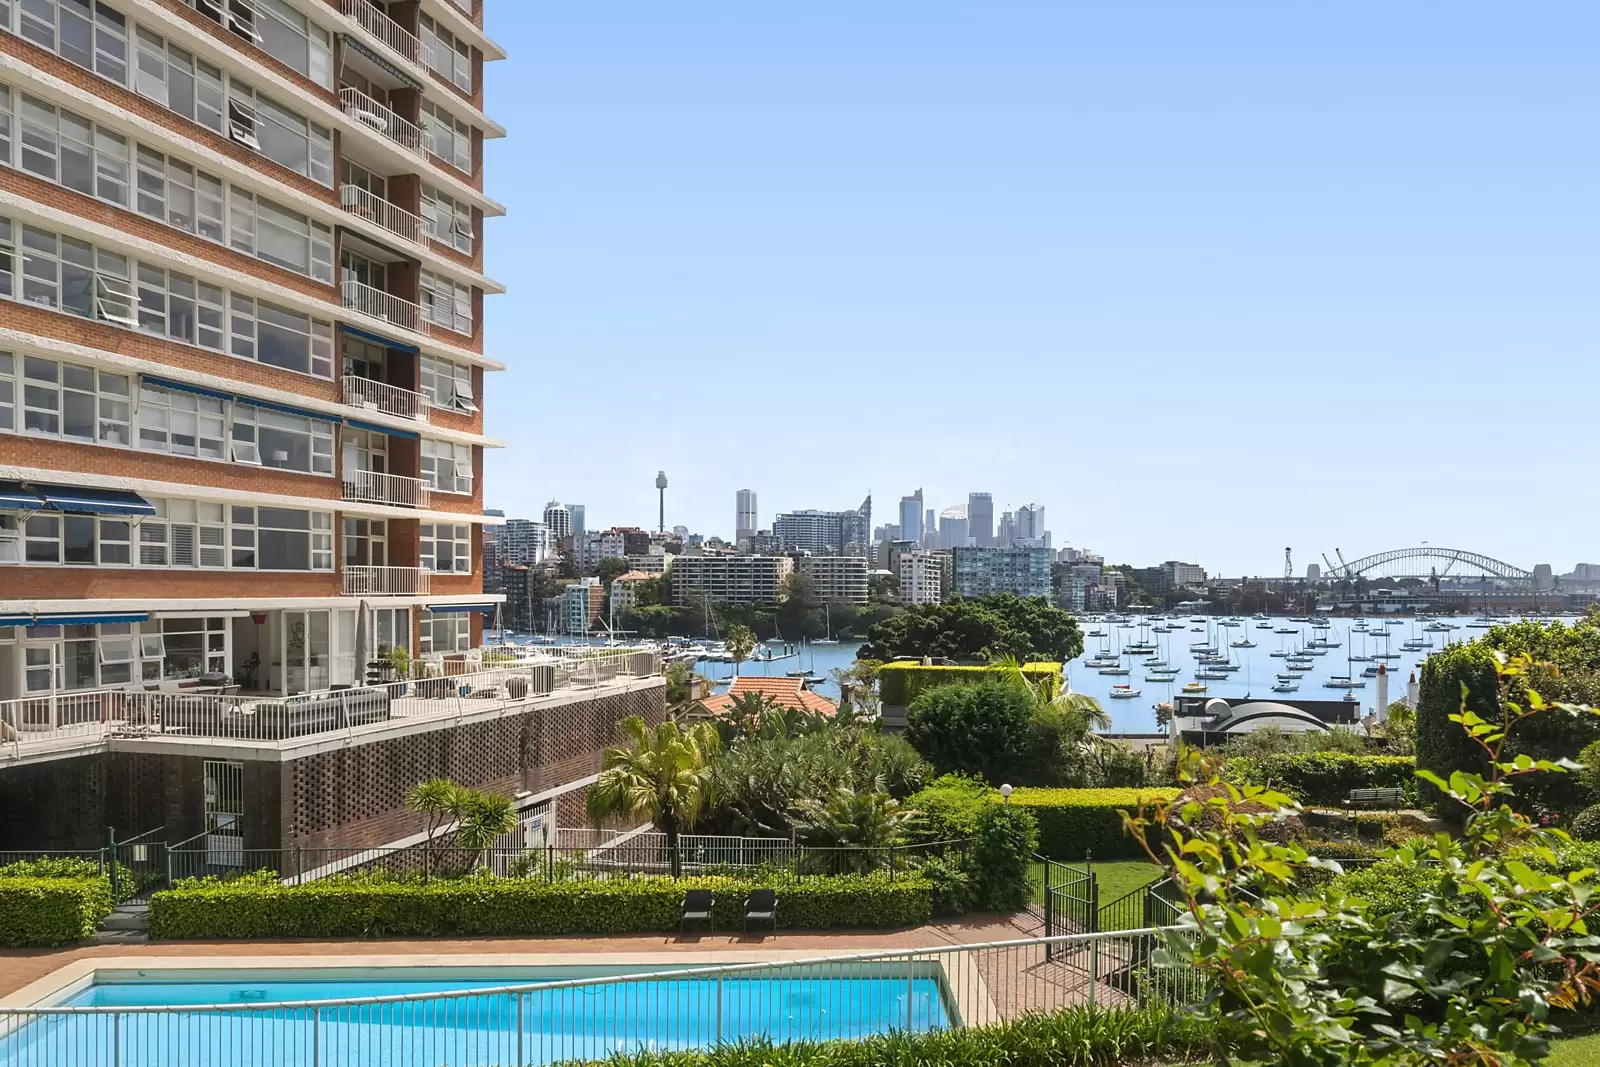 Photo #11: 21/11 Yarranabbe Road, Darling Point - Sold by Sydney Sotheby's International Realty